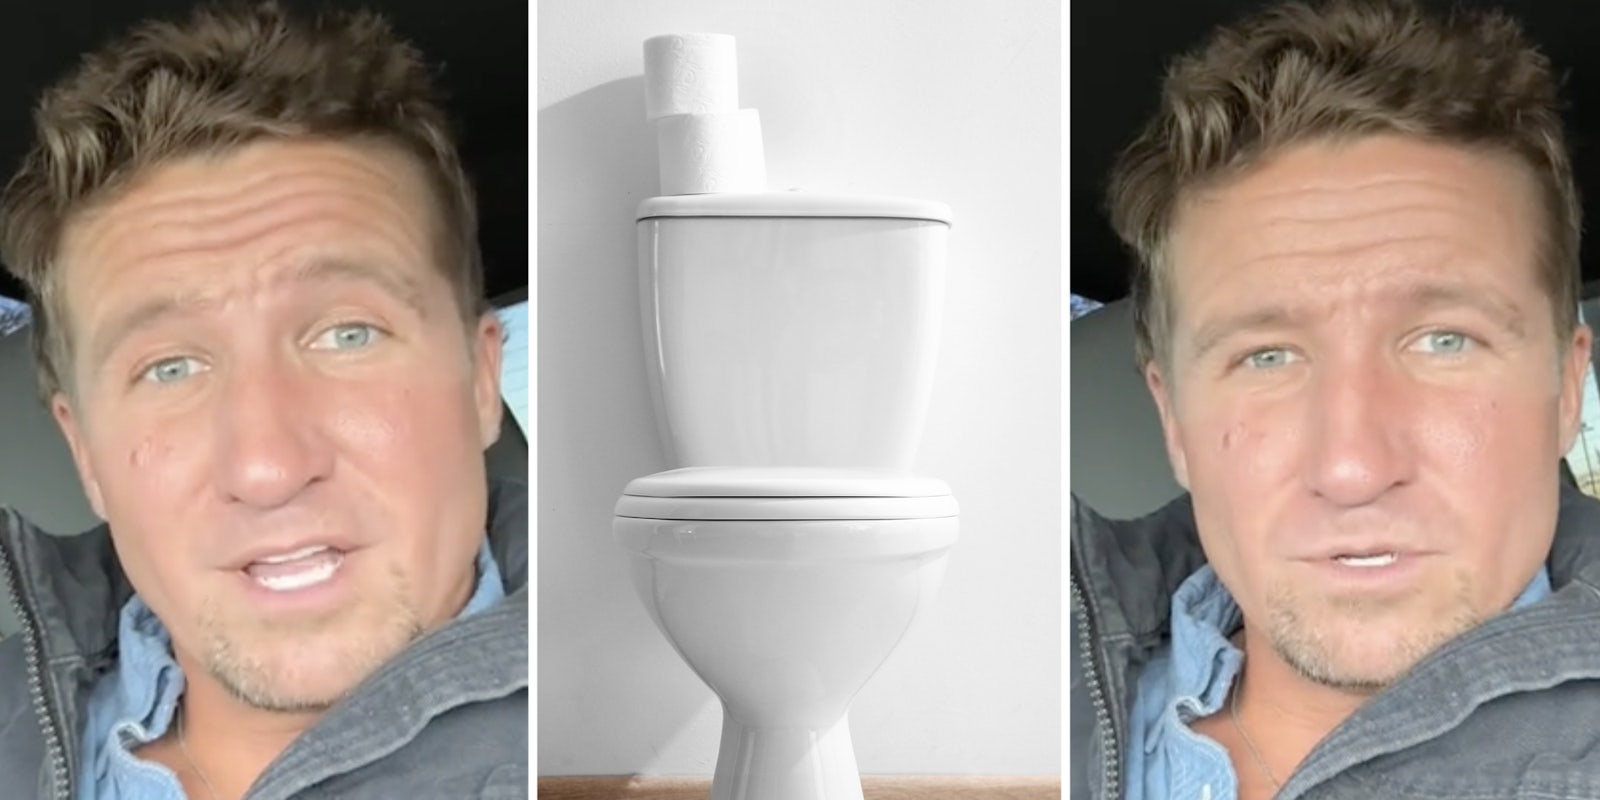 Man talking(l+r), Toilet with toilet paper rolls on top(c)